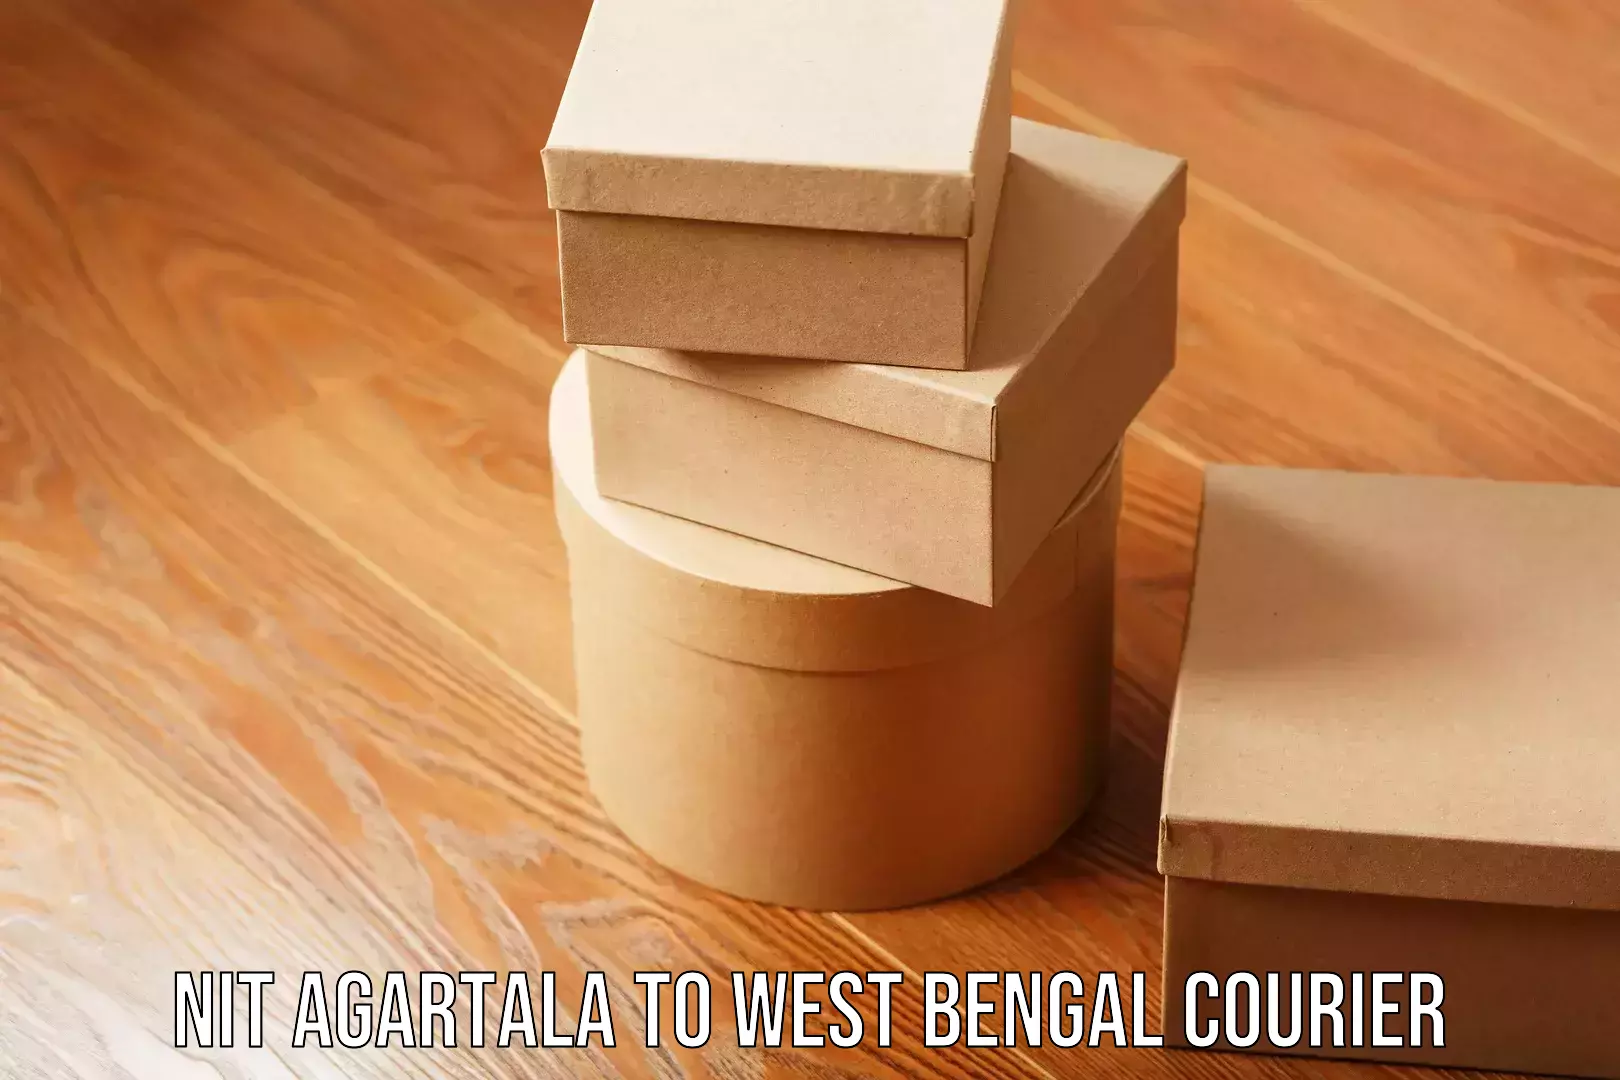 Online courier booking NIT Agartala to West Bengal